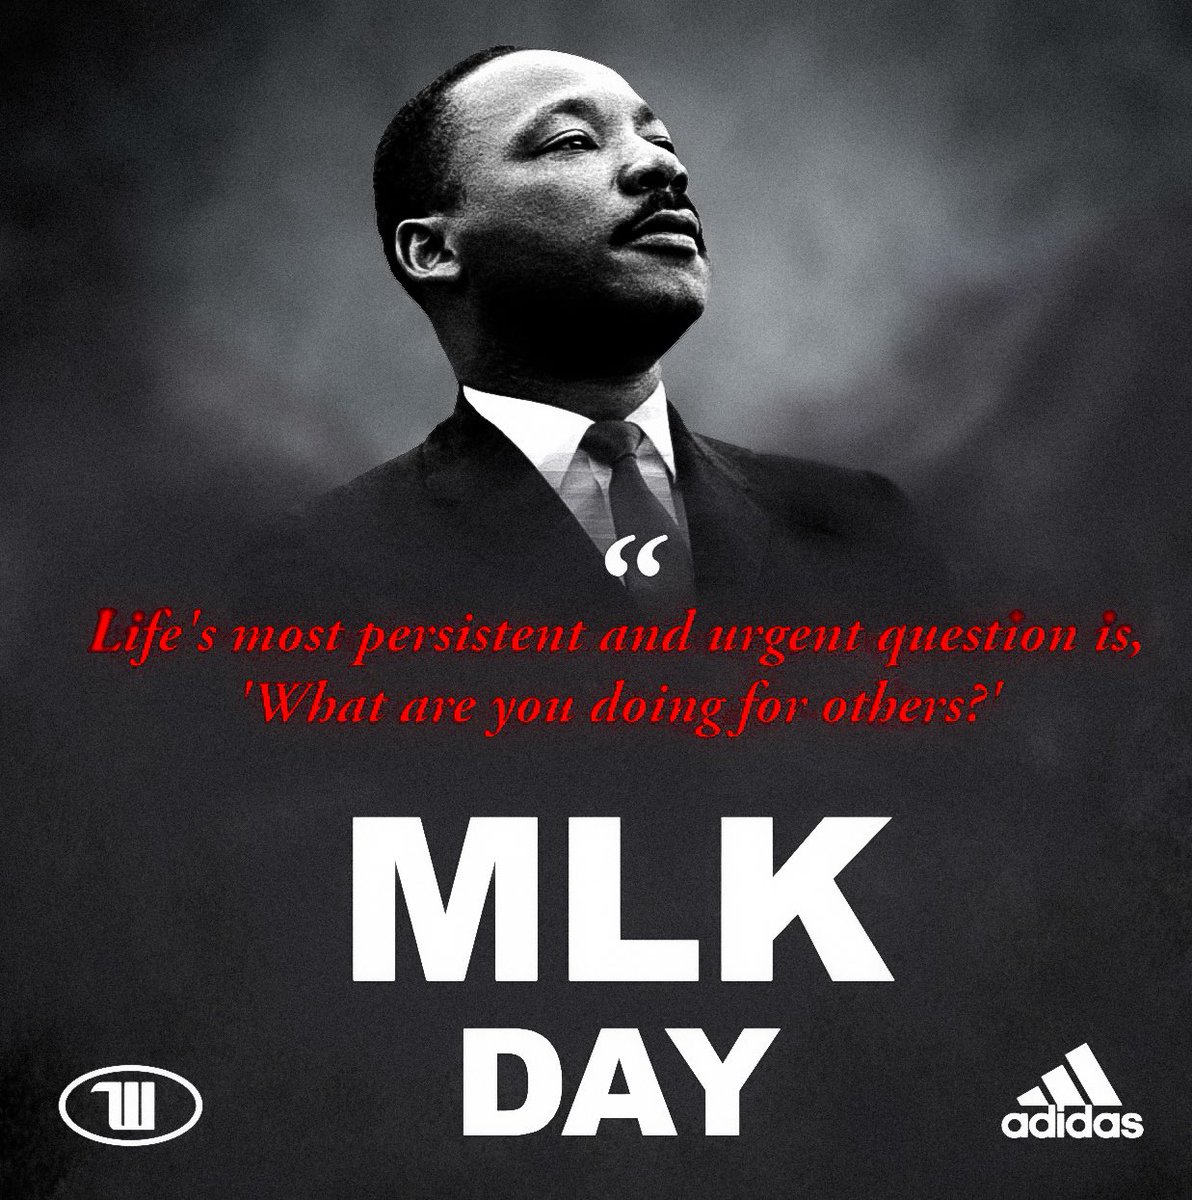 Today we remember and honor the life and legacy of Dr. Martin Luther King Jr. #TigerUp #Wittenberg #MLKDay